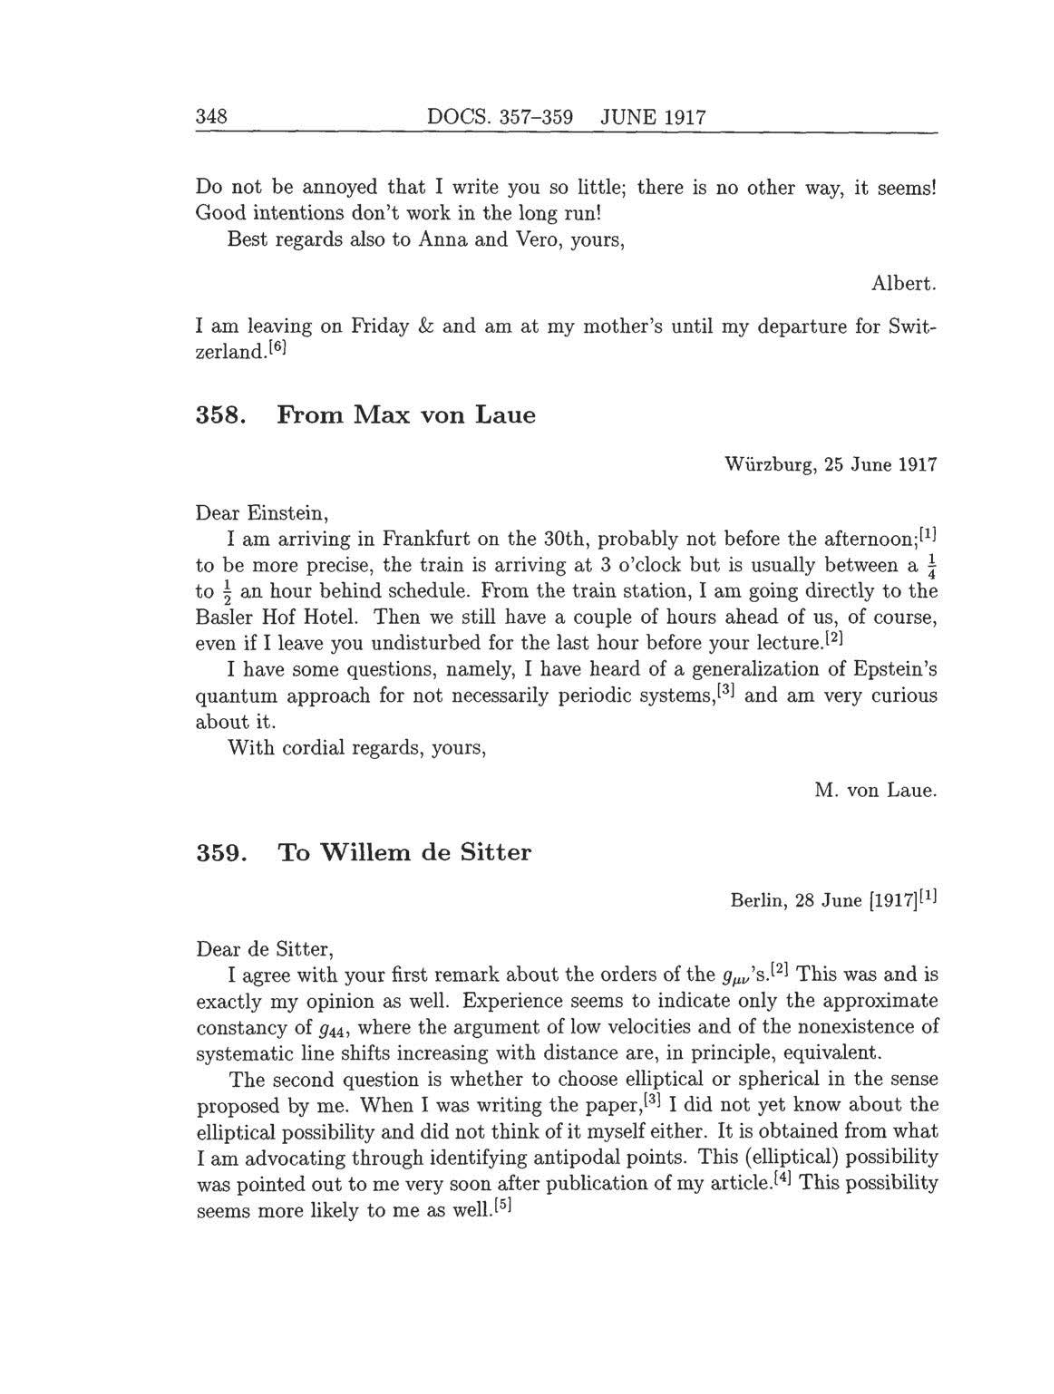 Volume 8: The Berlin Years: Correspondence, 1914-1918 (English translation supplement) page 348